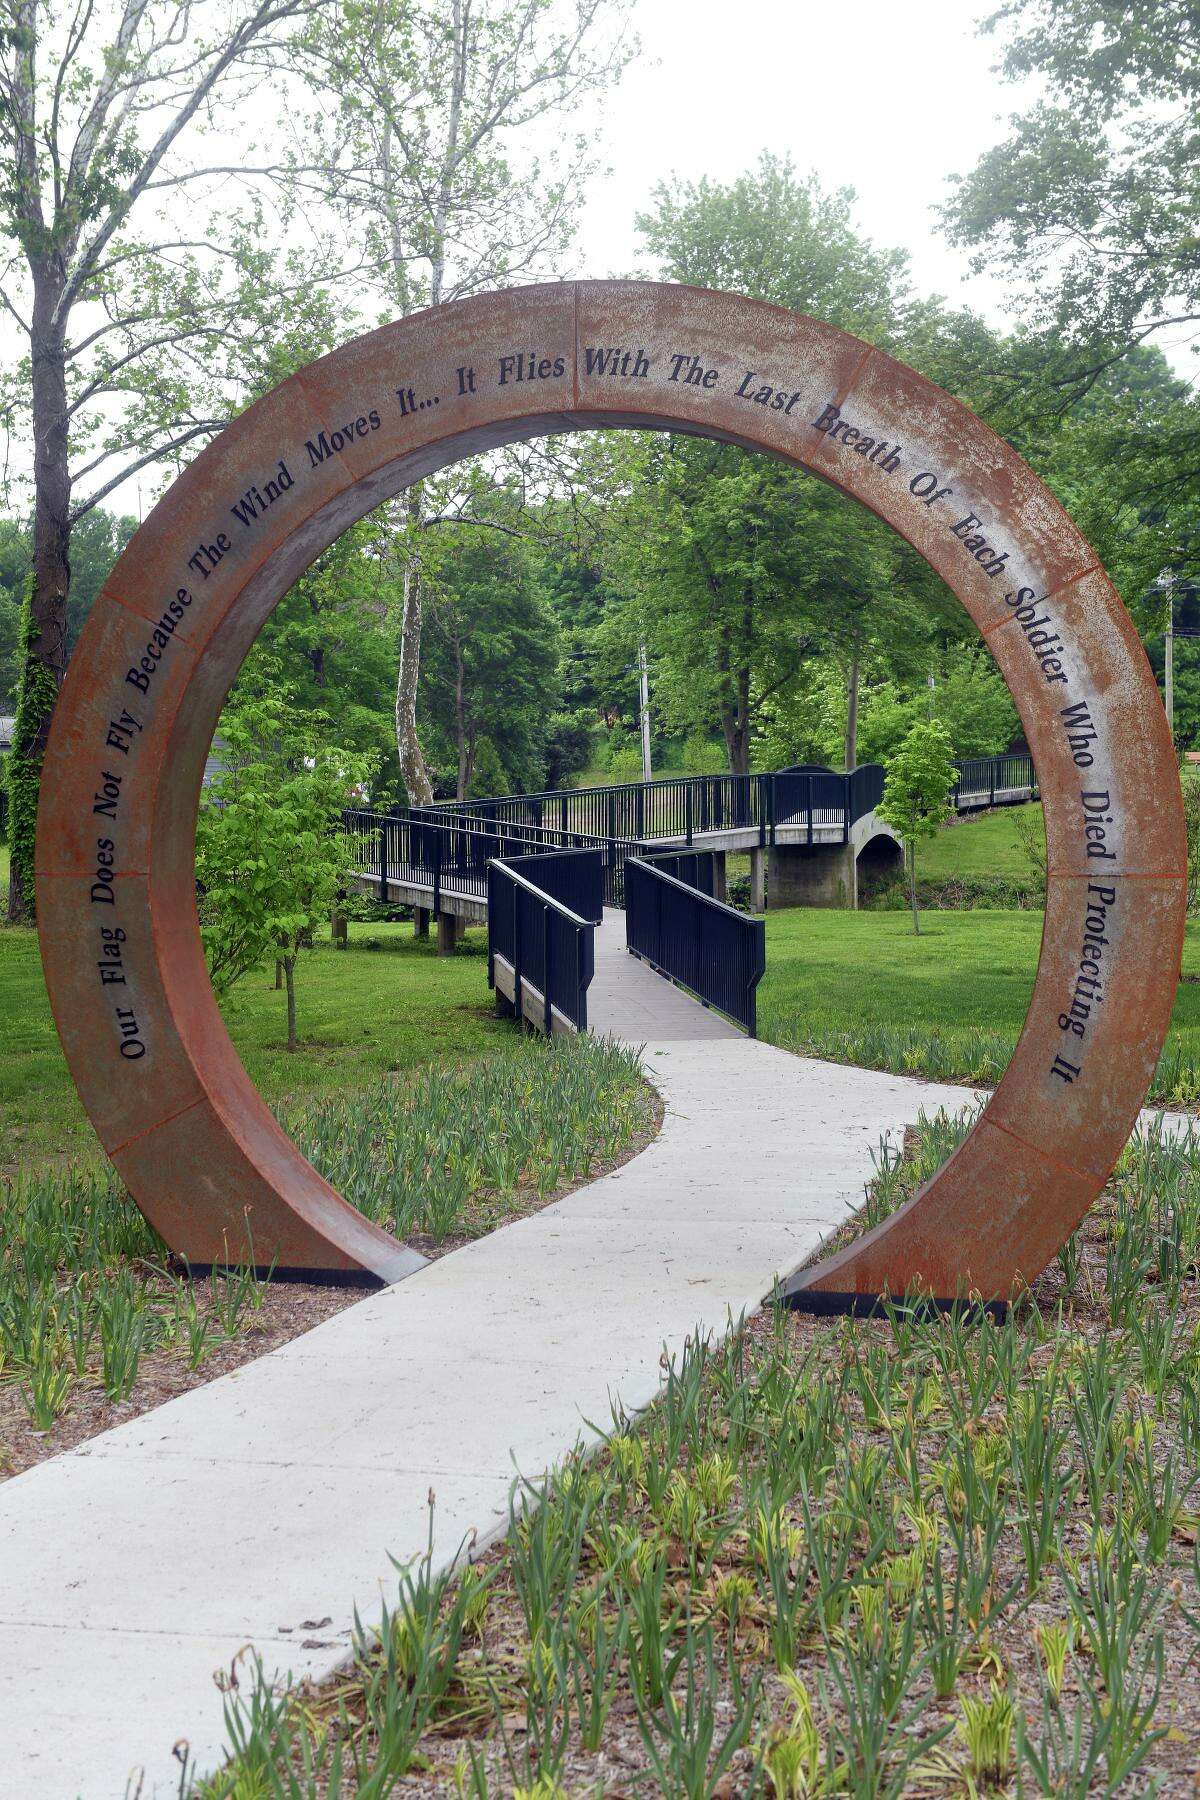 The newly installed arch at Vietnam Veterans Memorial Park, in Trumbull, Conn. May 27, 2022.